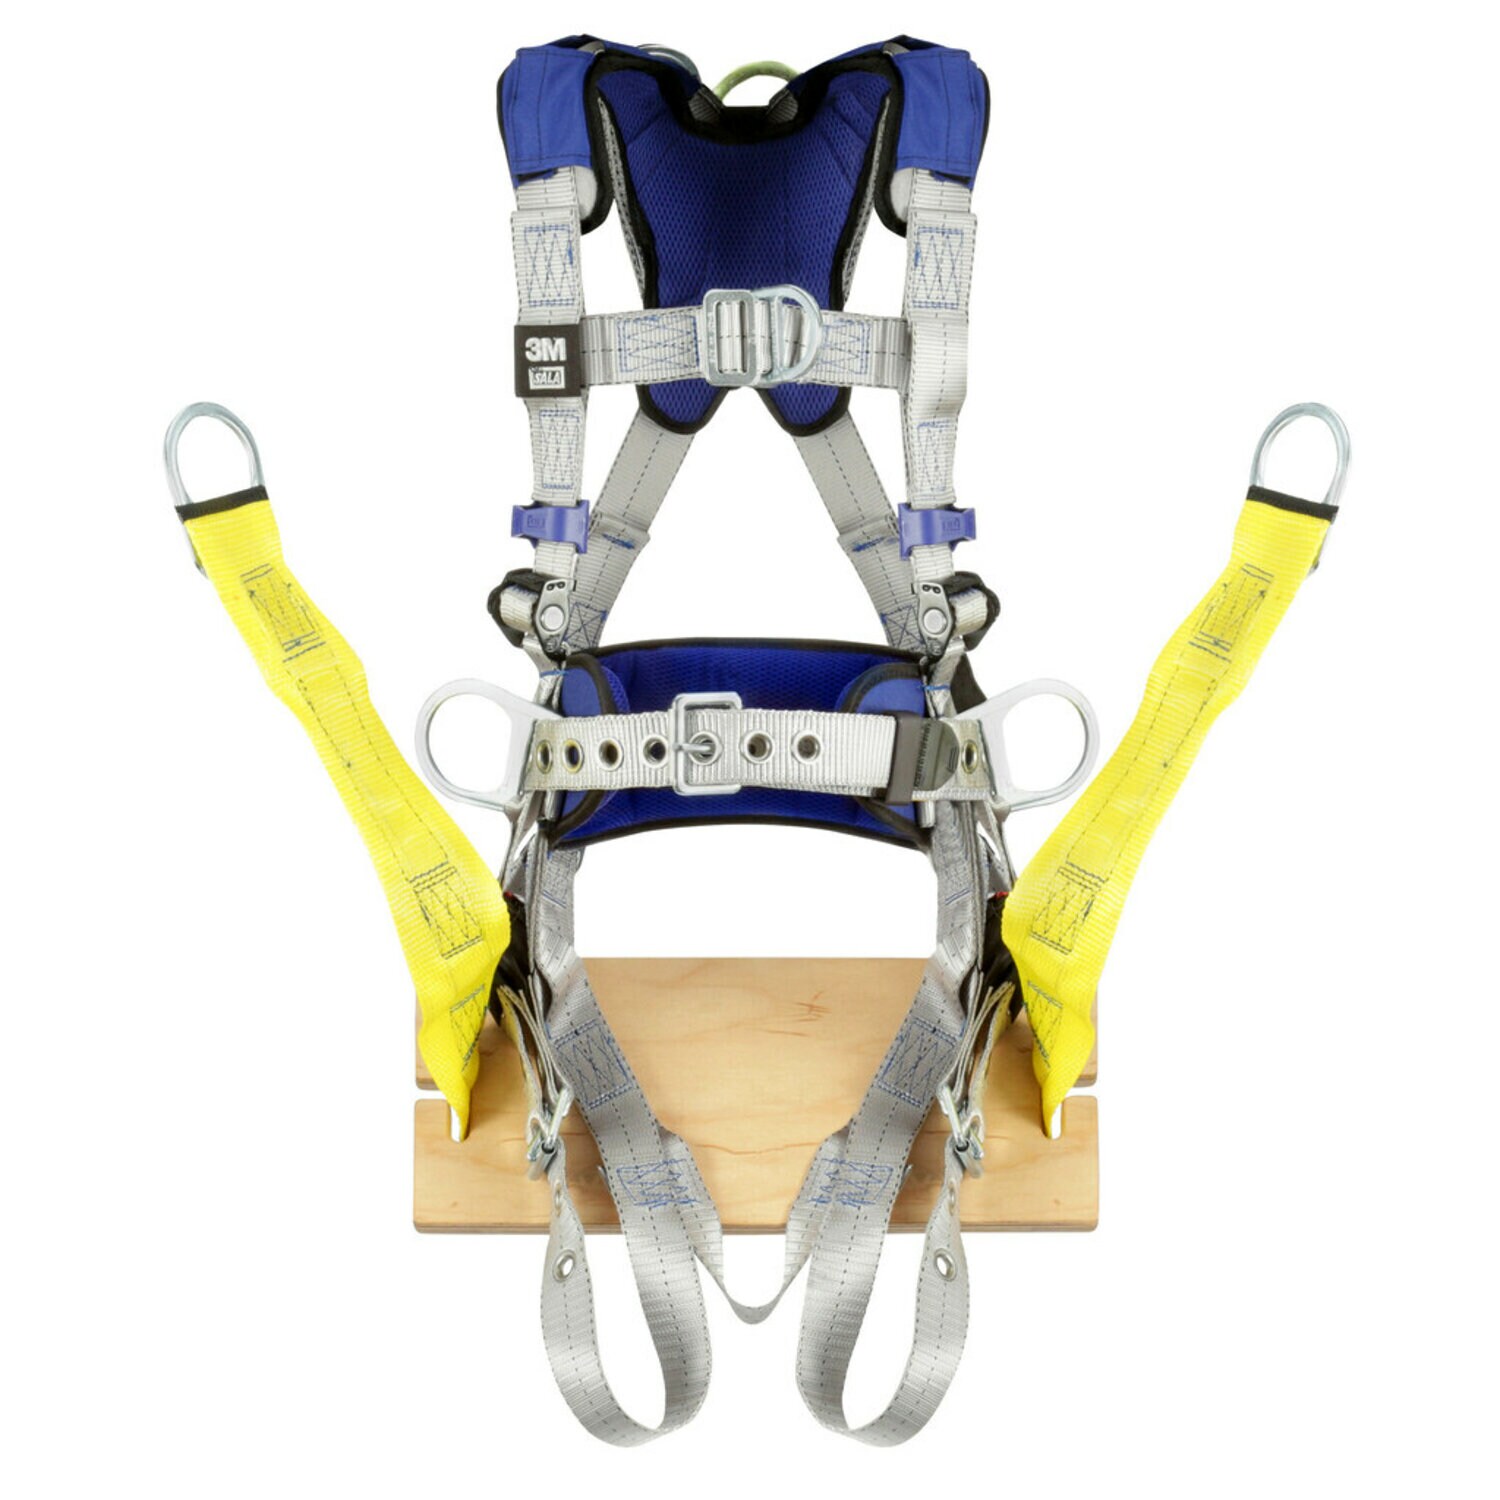 7012817630 - 3M DBI-SALA ExoFit X100 Comfort Construction Oil and Gas Climbing/Positioning/Suspension Safety Harness 1401148, X-Large